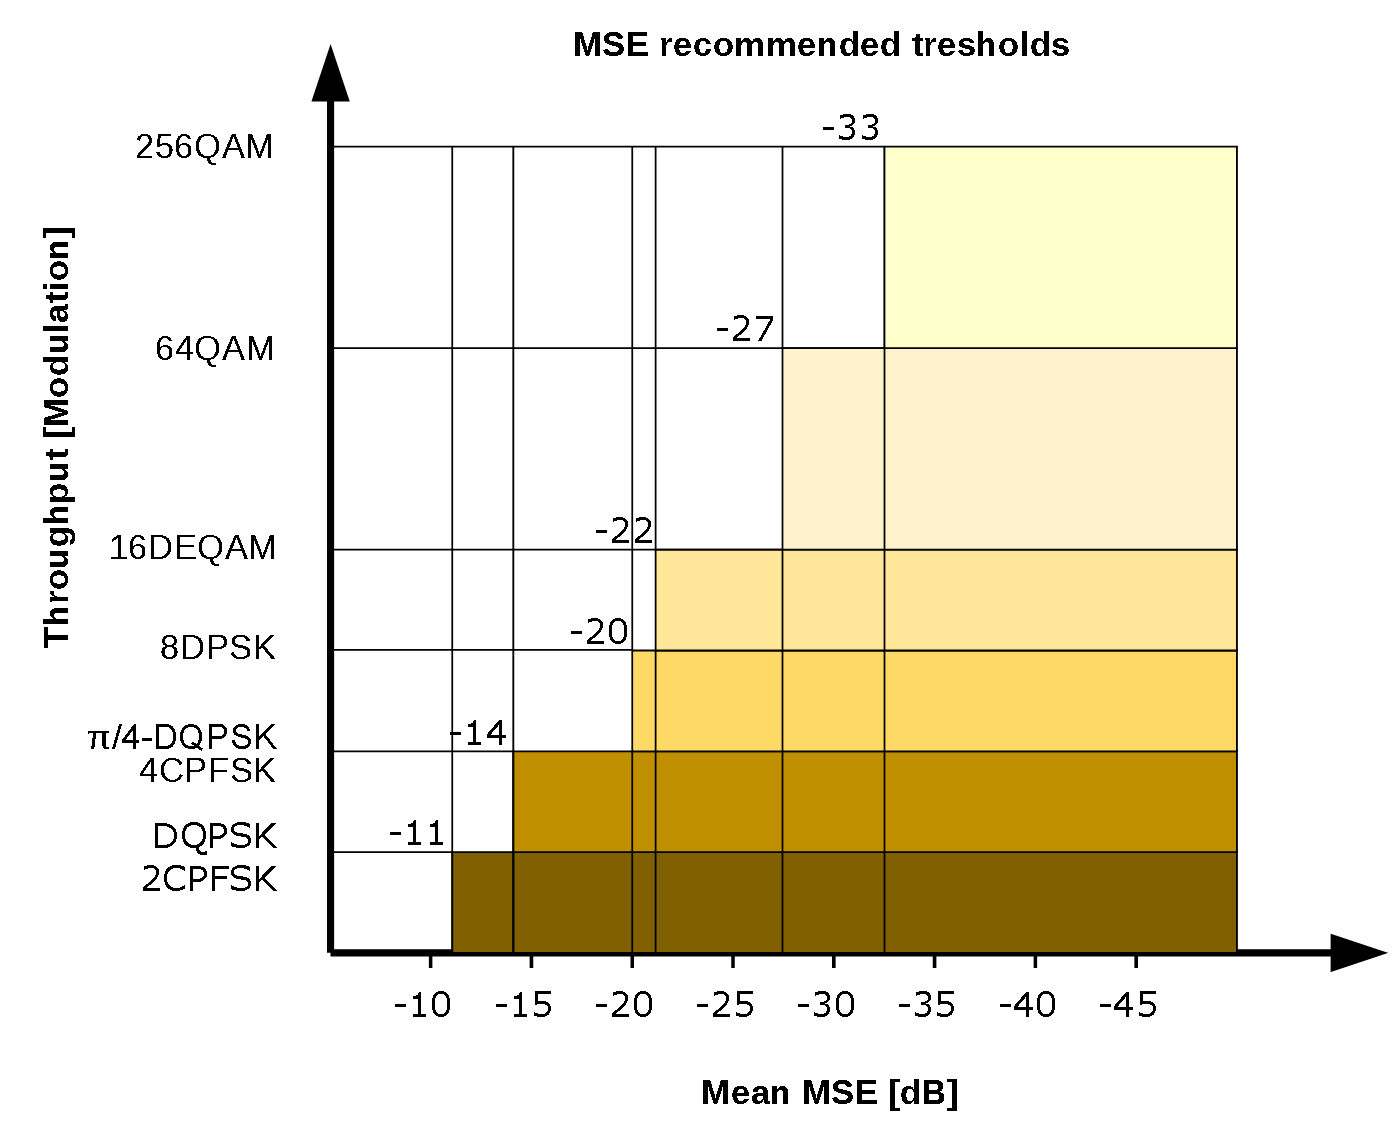 MSE recommended tresholds